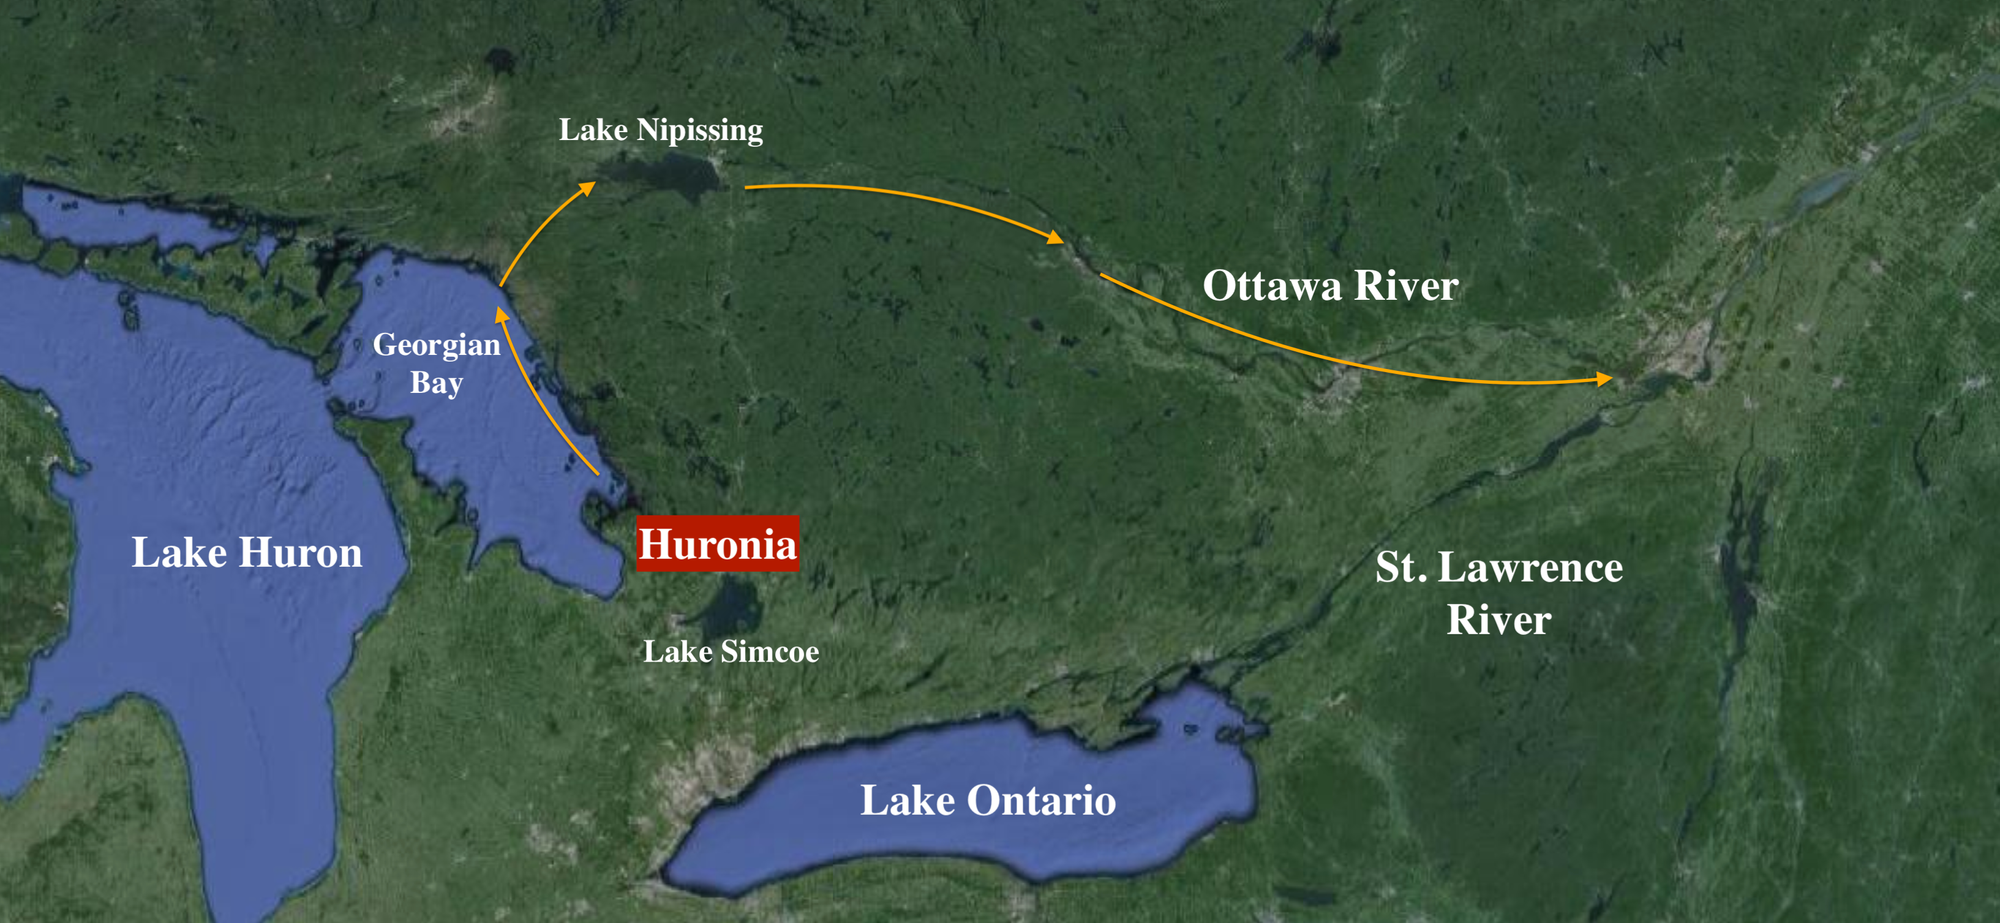 Map showing approximate path of seasonal trade route from Huronia to St. Lawrence along Ottawa River route.